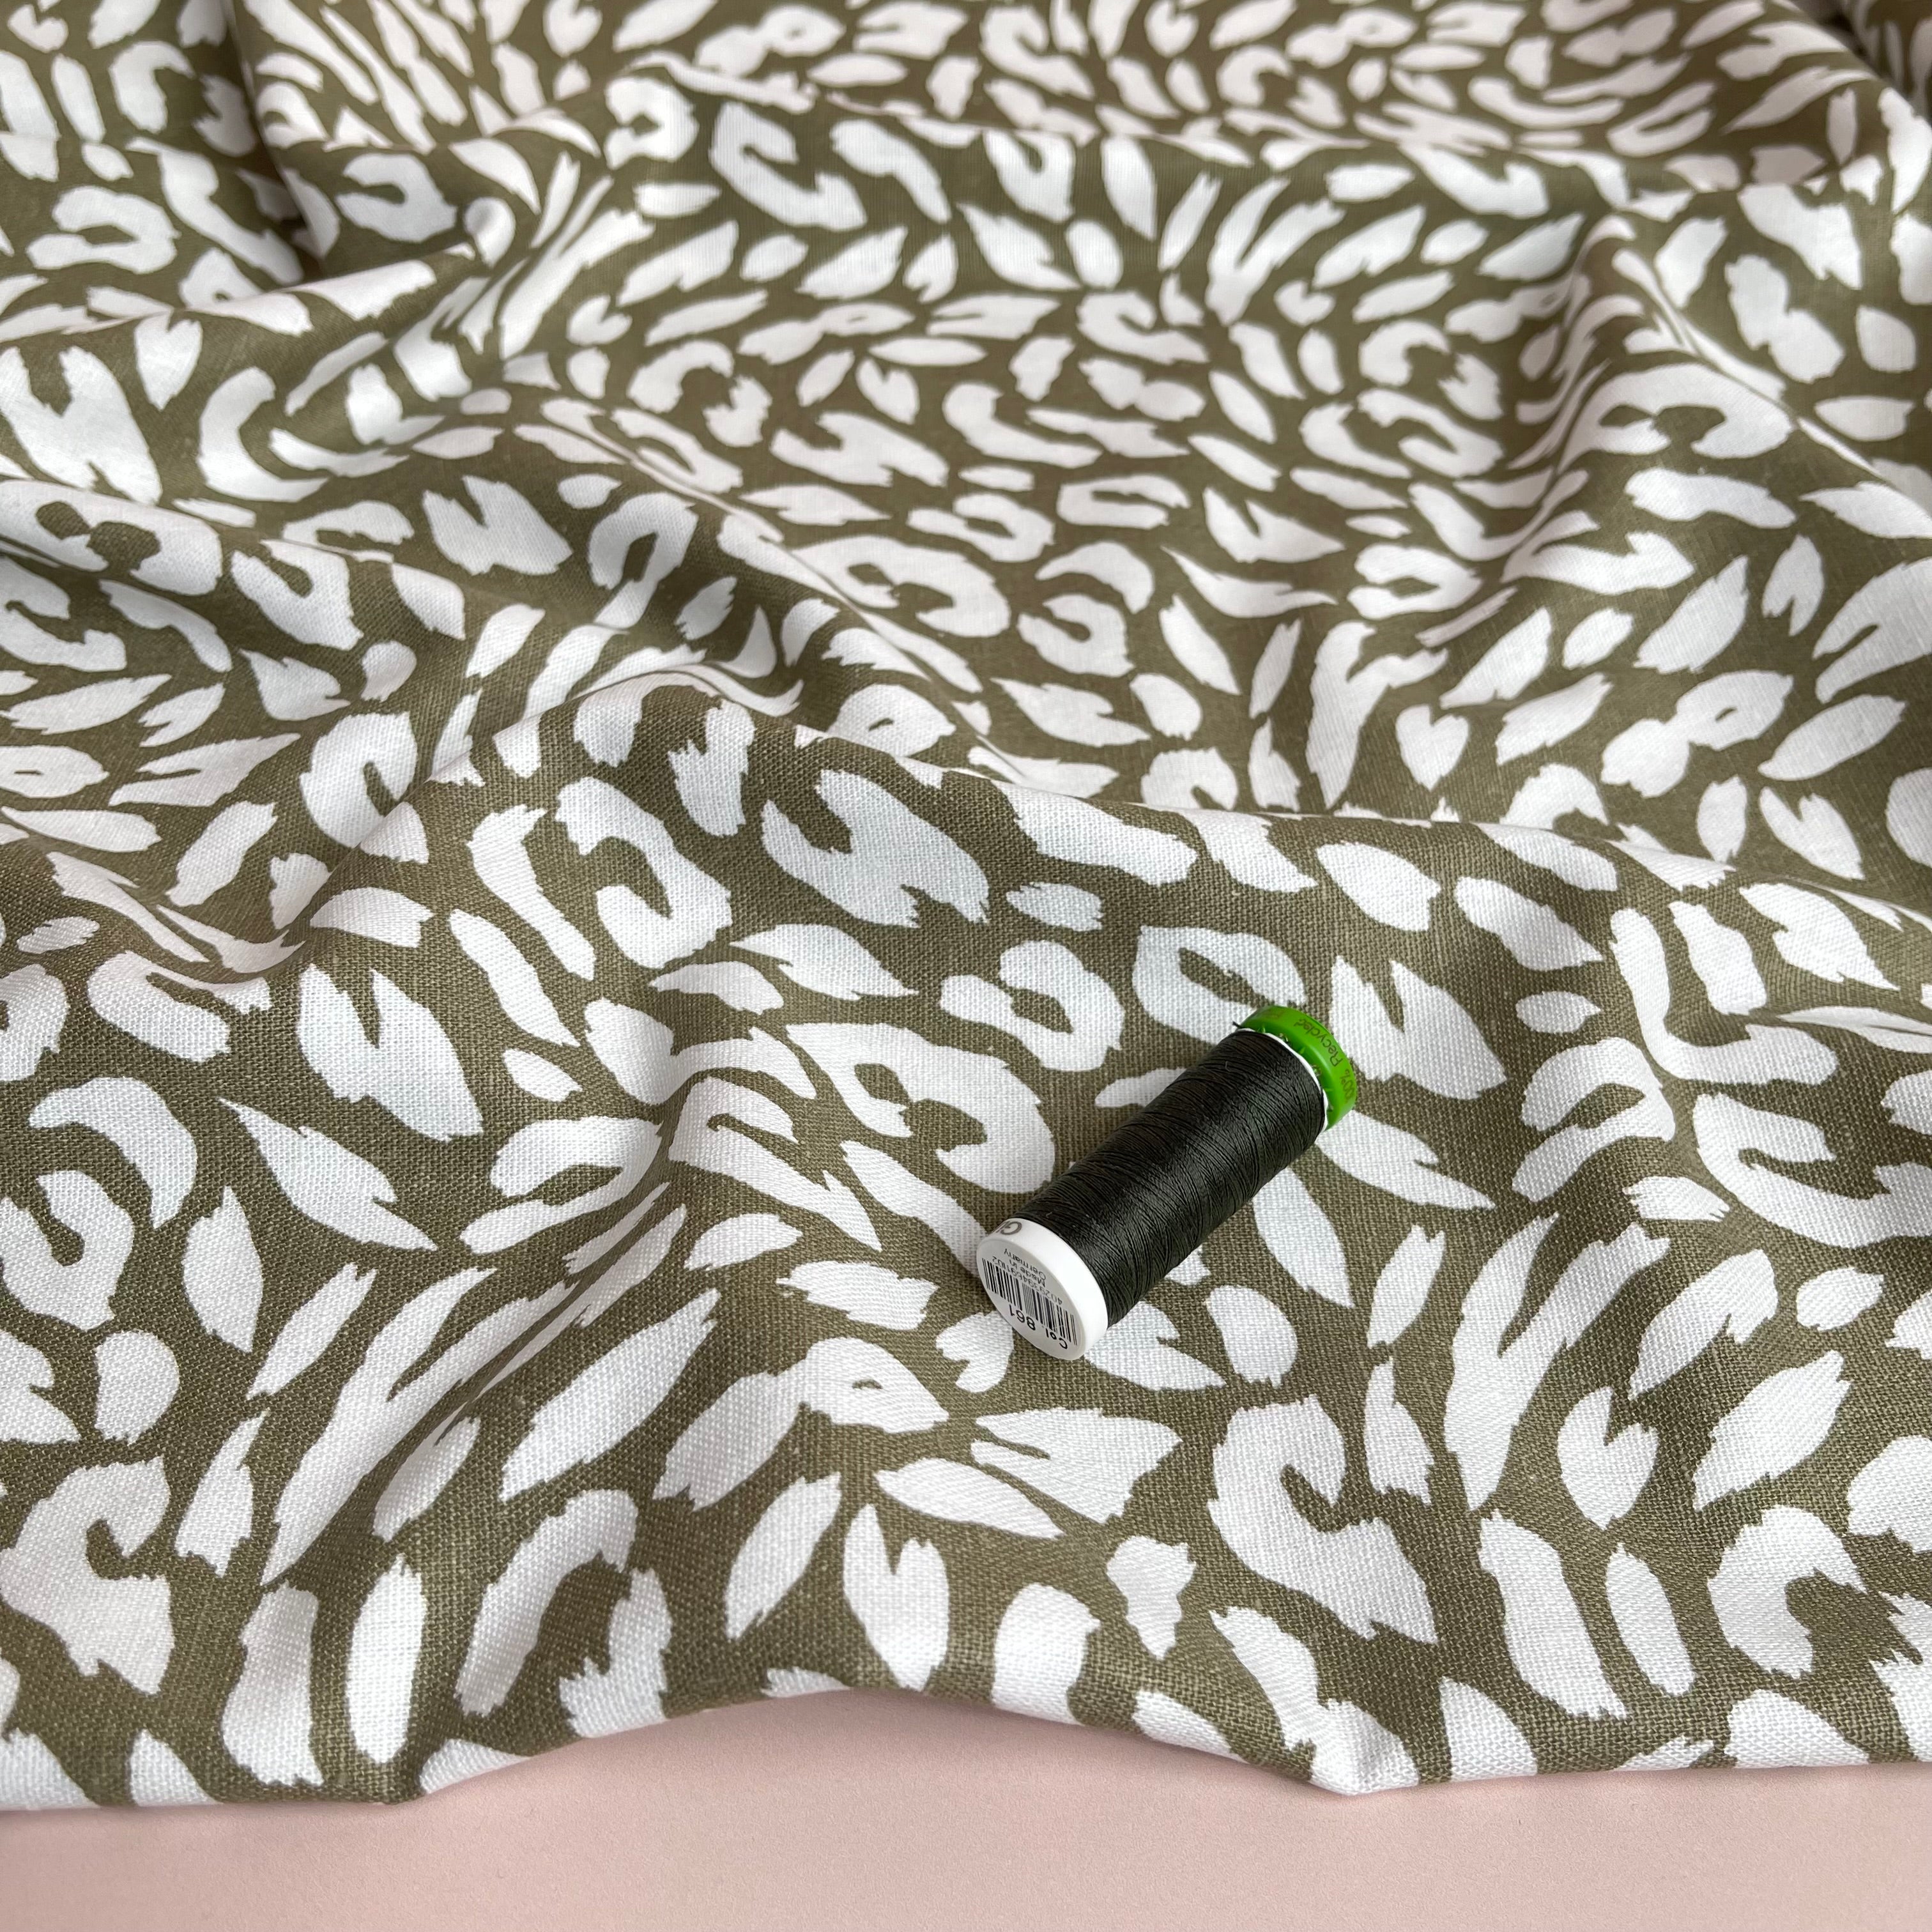 REMNANT 1.65 Metres - Animal Print on Olive Green Linen Viscose Blend Fabric